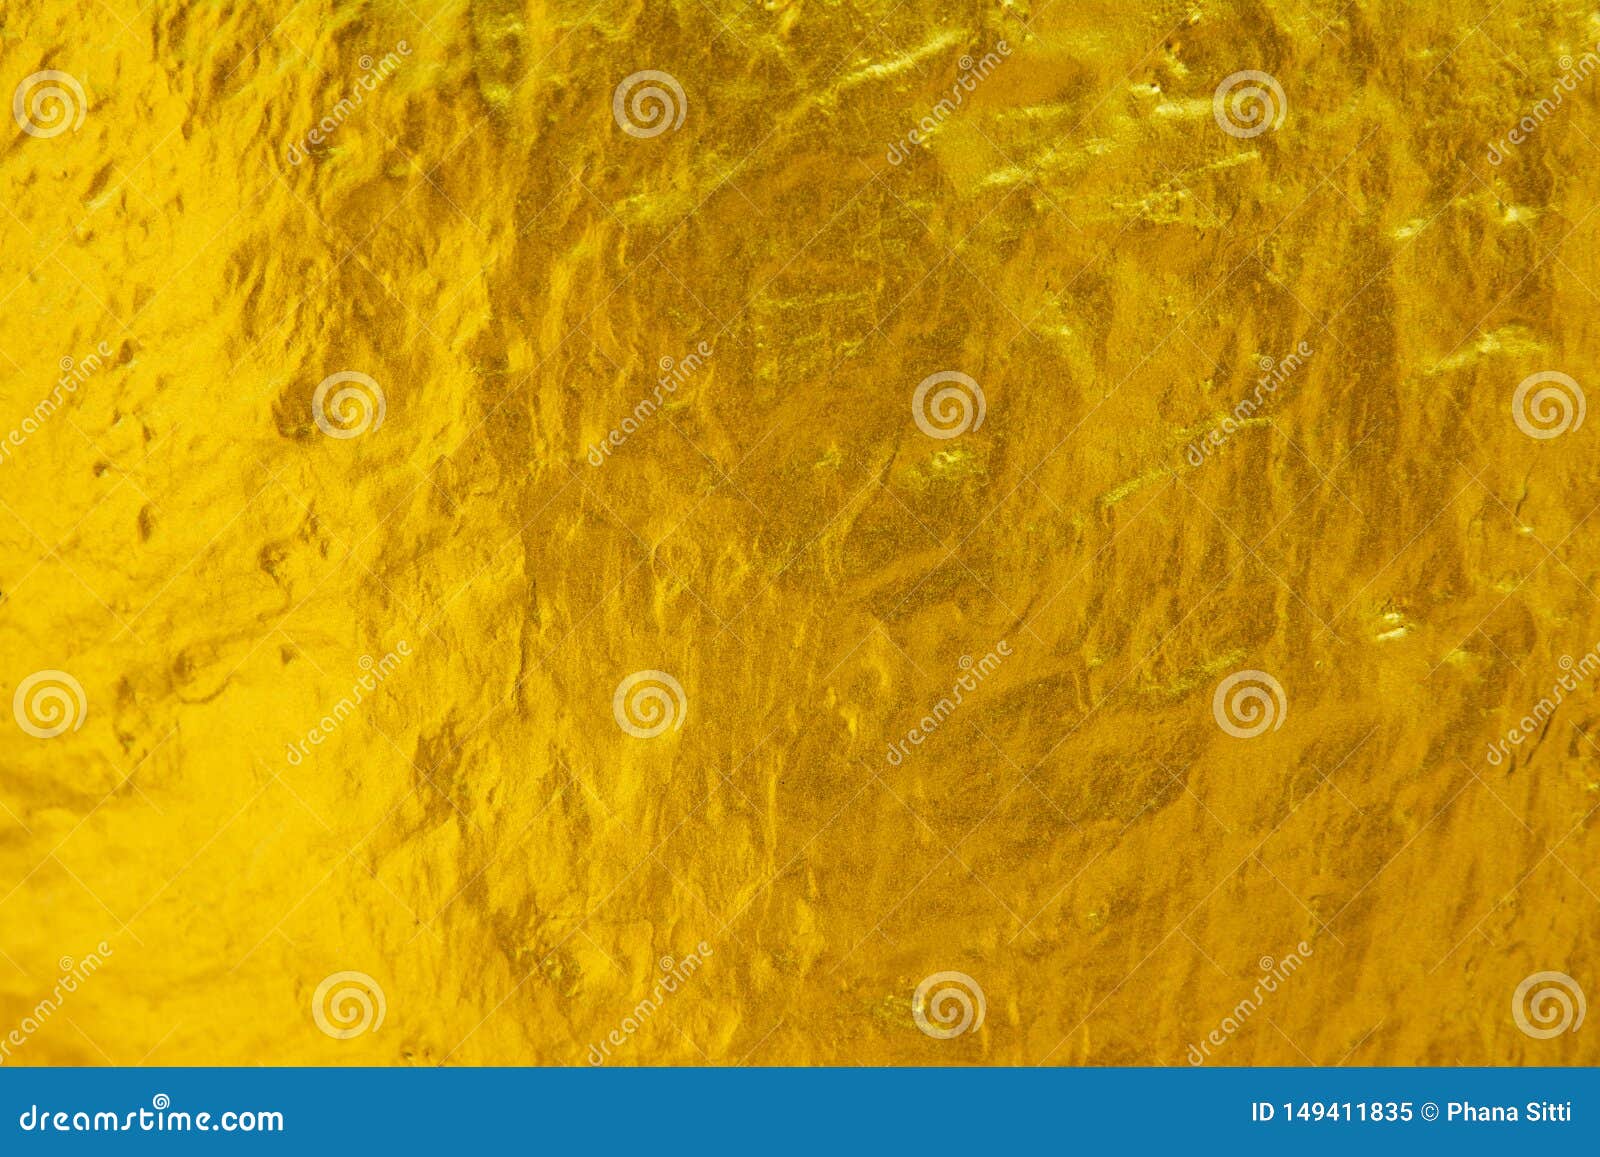 Clean Gold Texture Background Illustration Stock Photo - Download